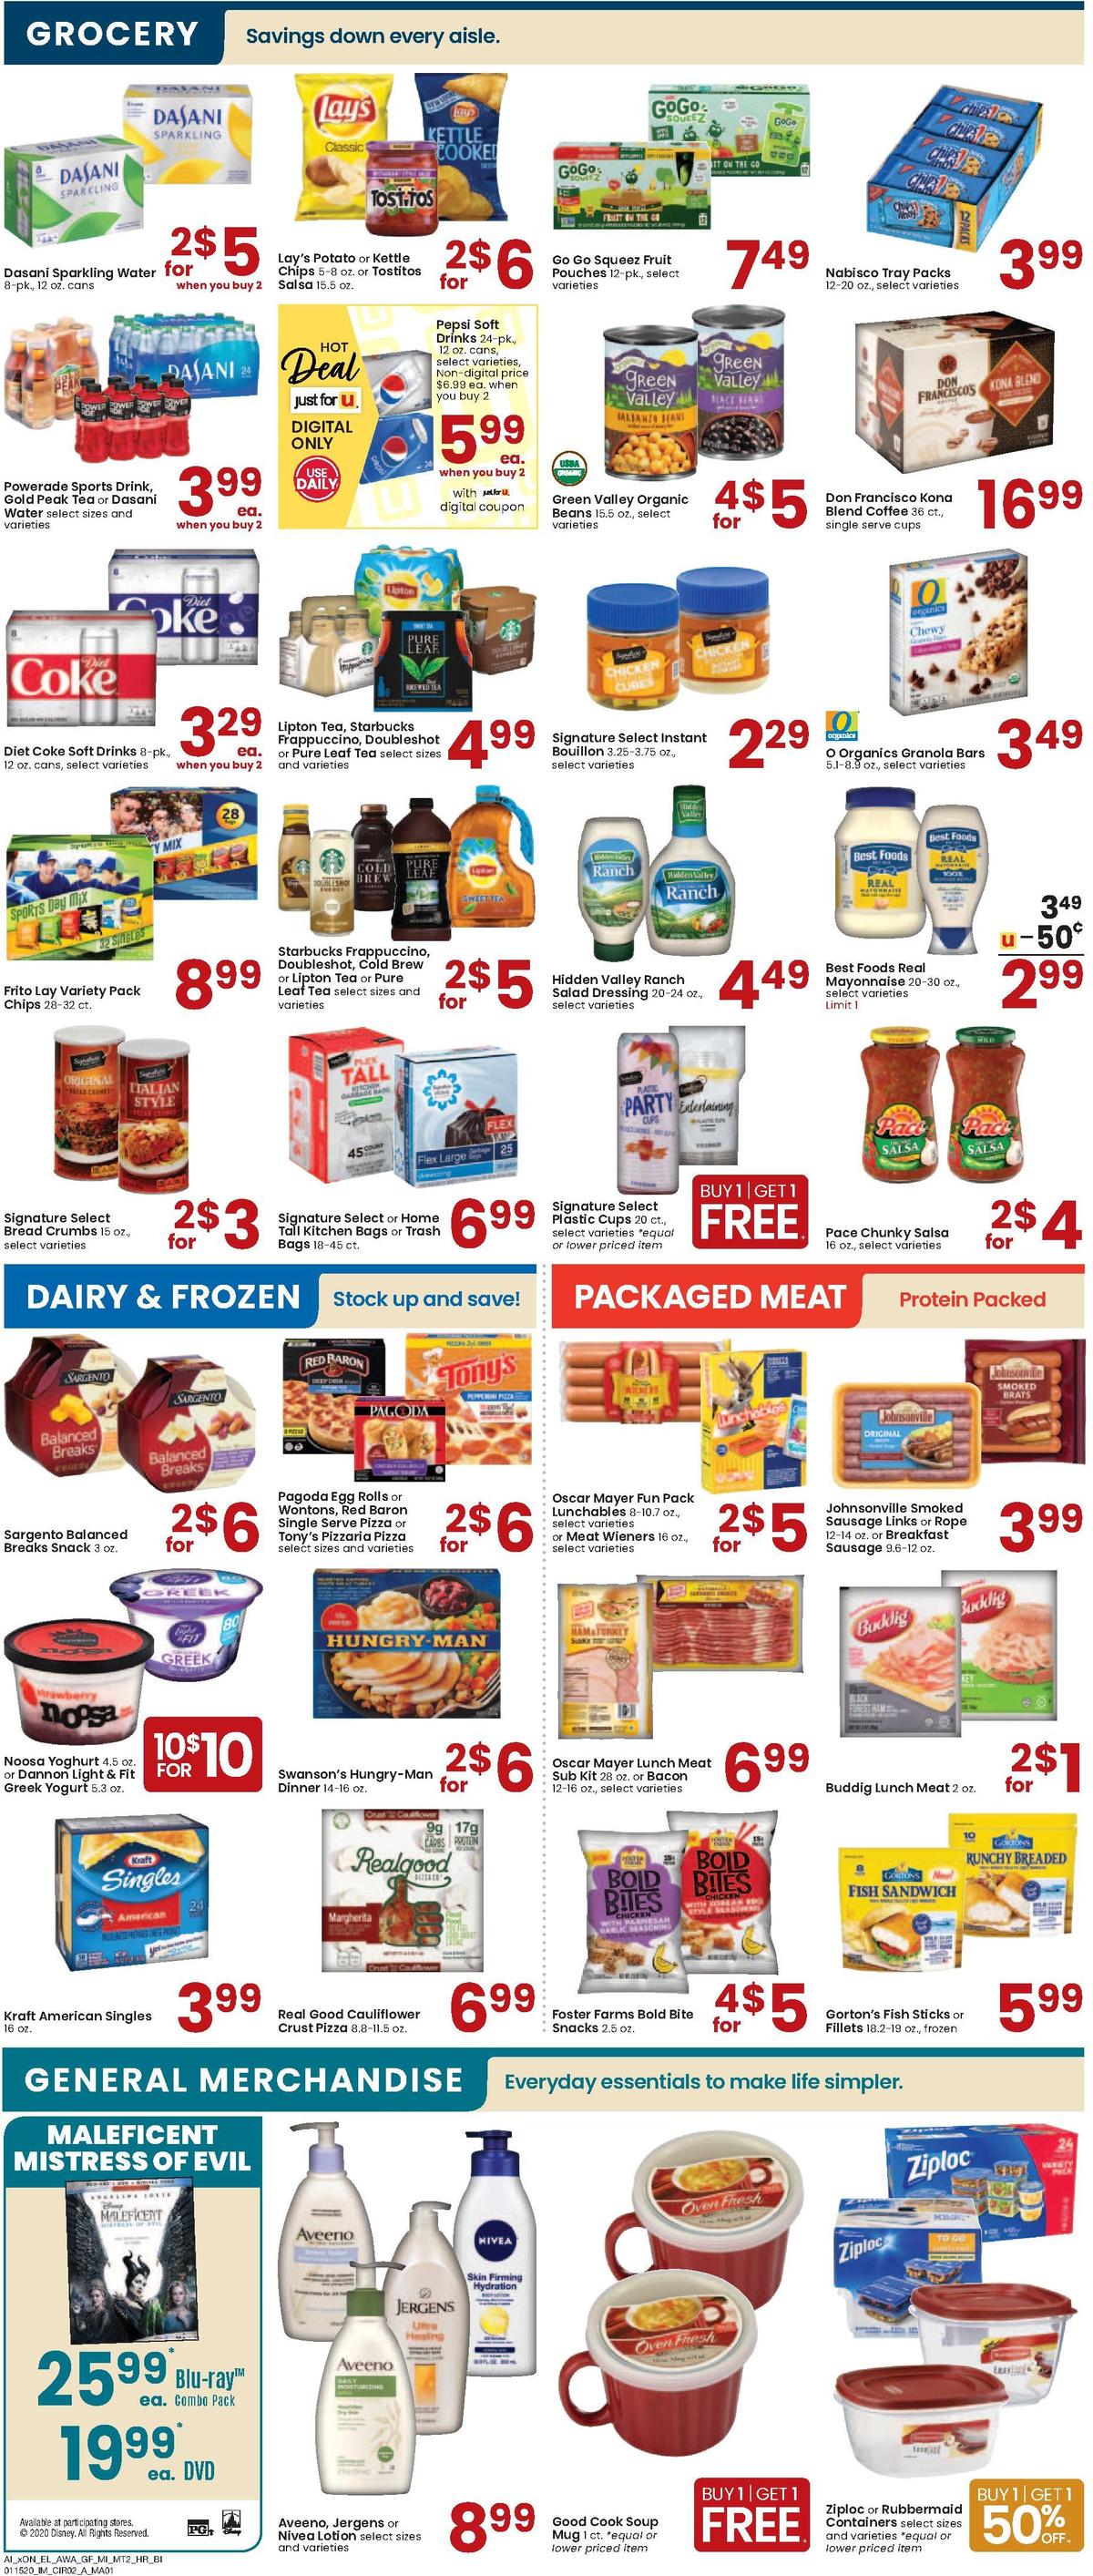 Albertsons Weekly Ad from January 15